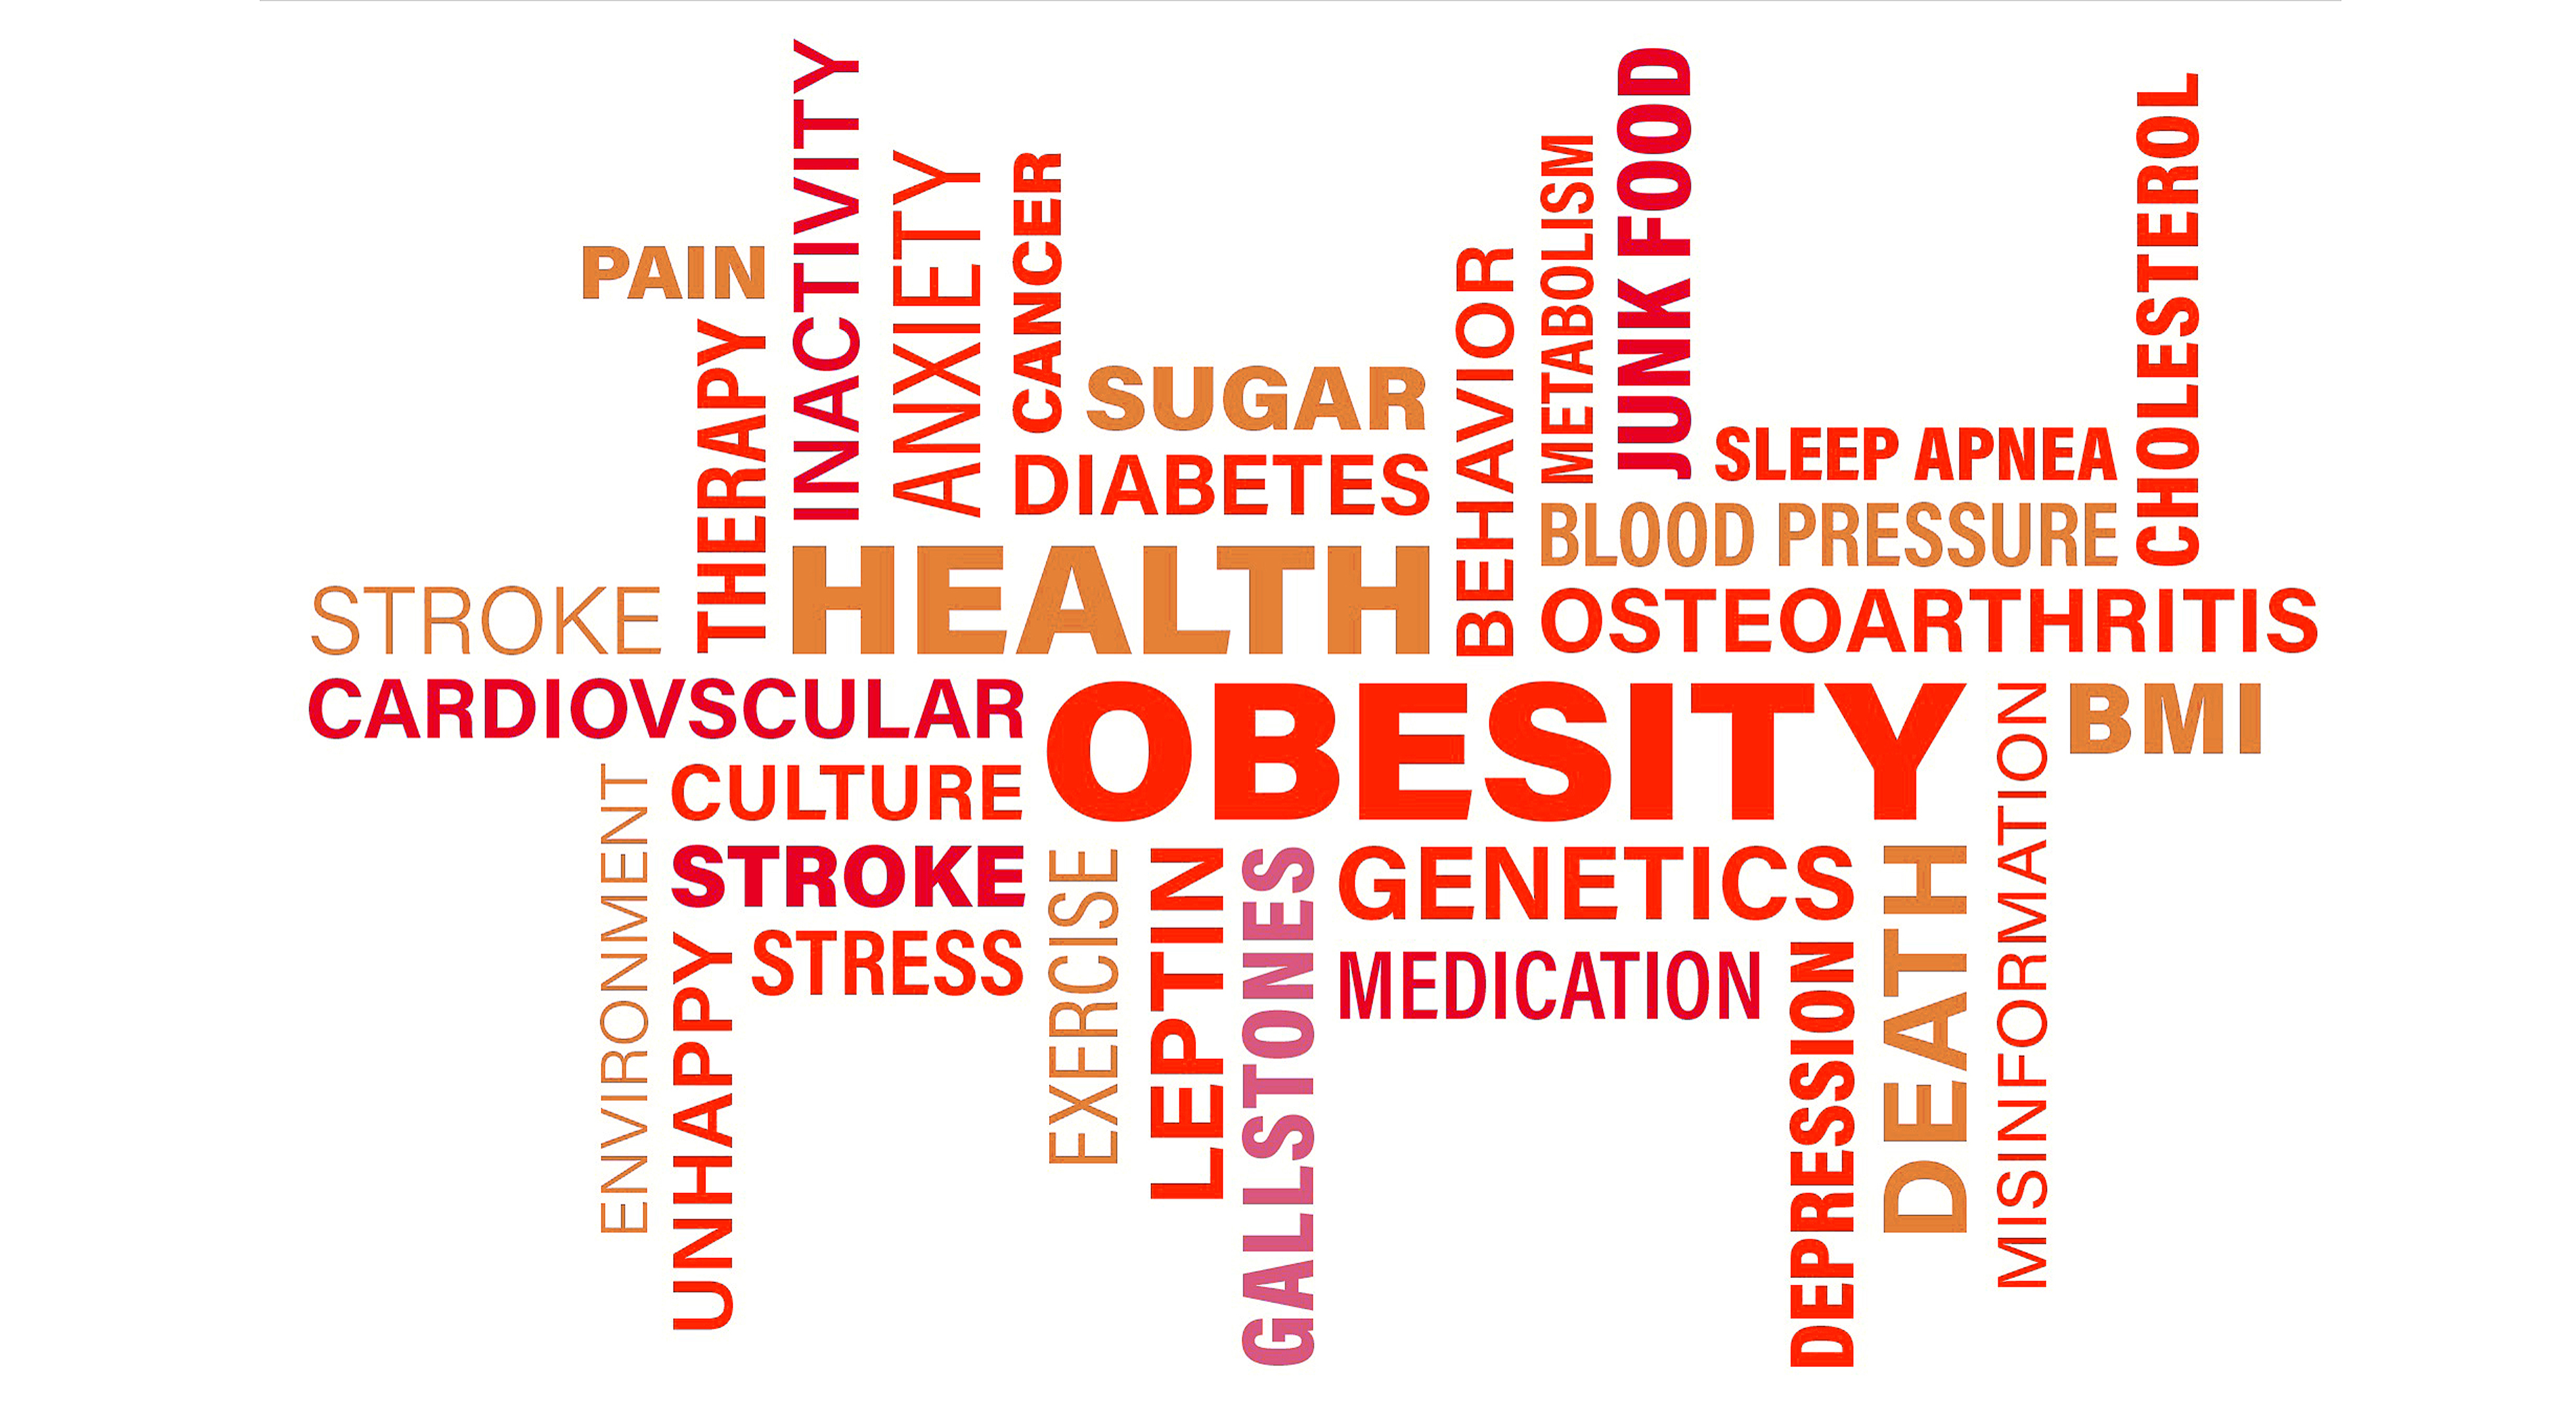 When is obesity diagnosed?